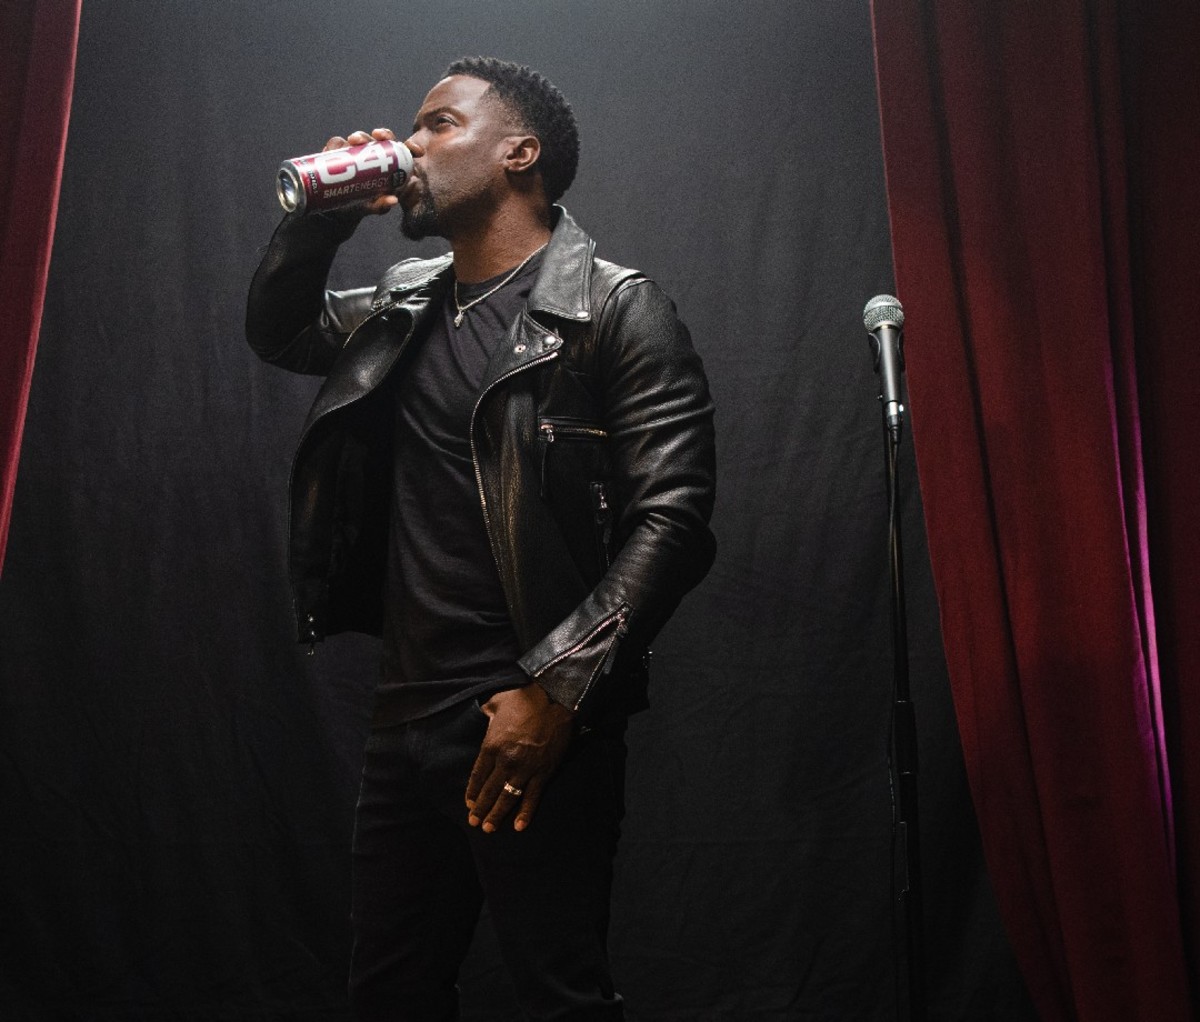 Kevin Hart in a black leather jacket stands next to a mic while drinking a can of C4 energy beverage